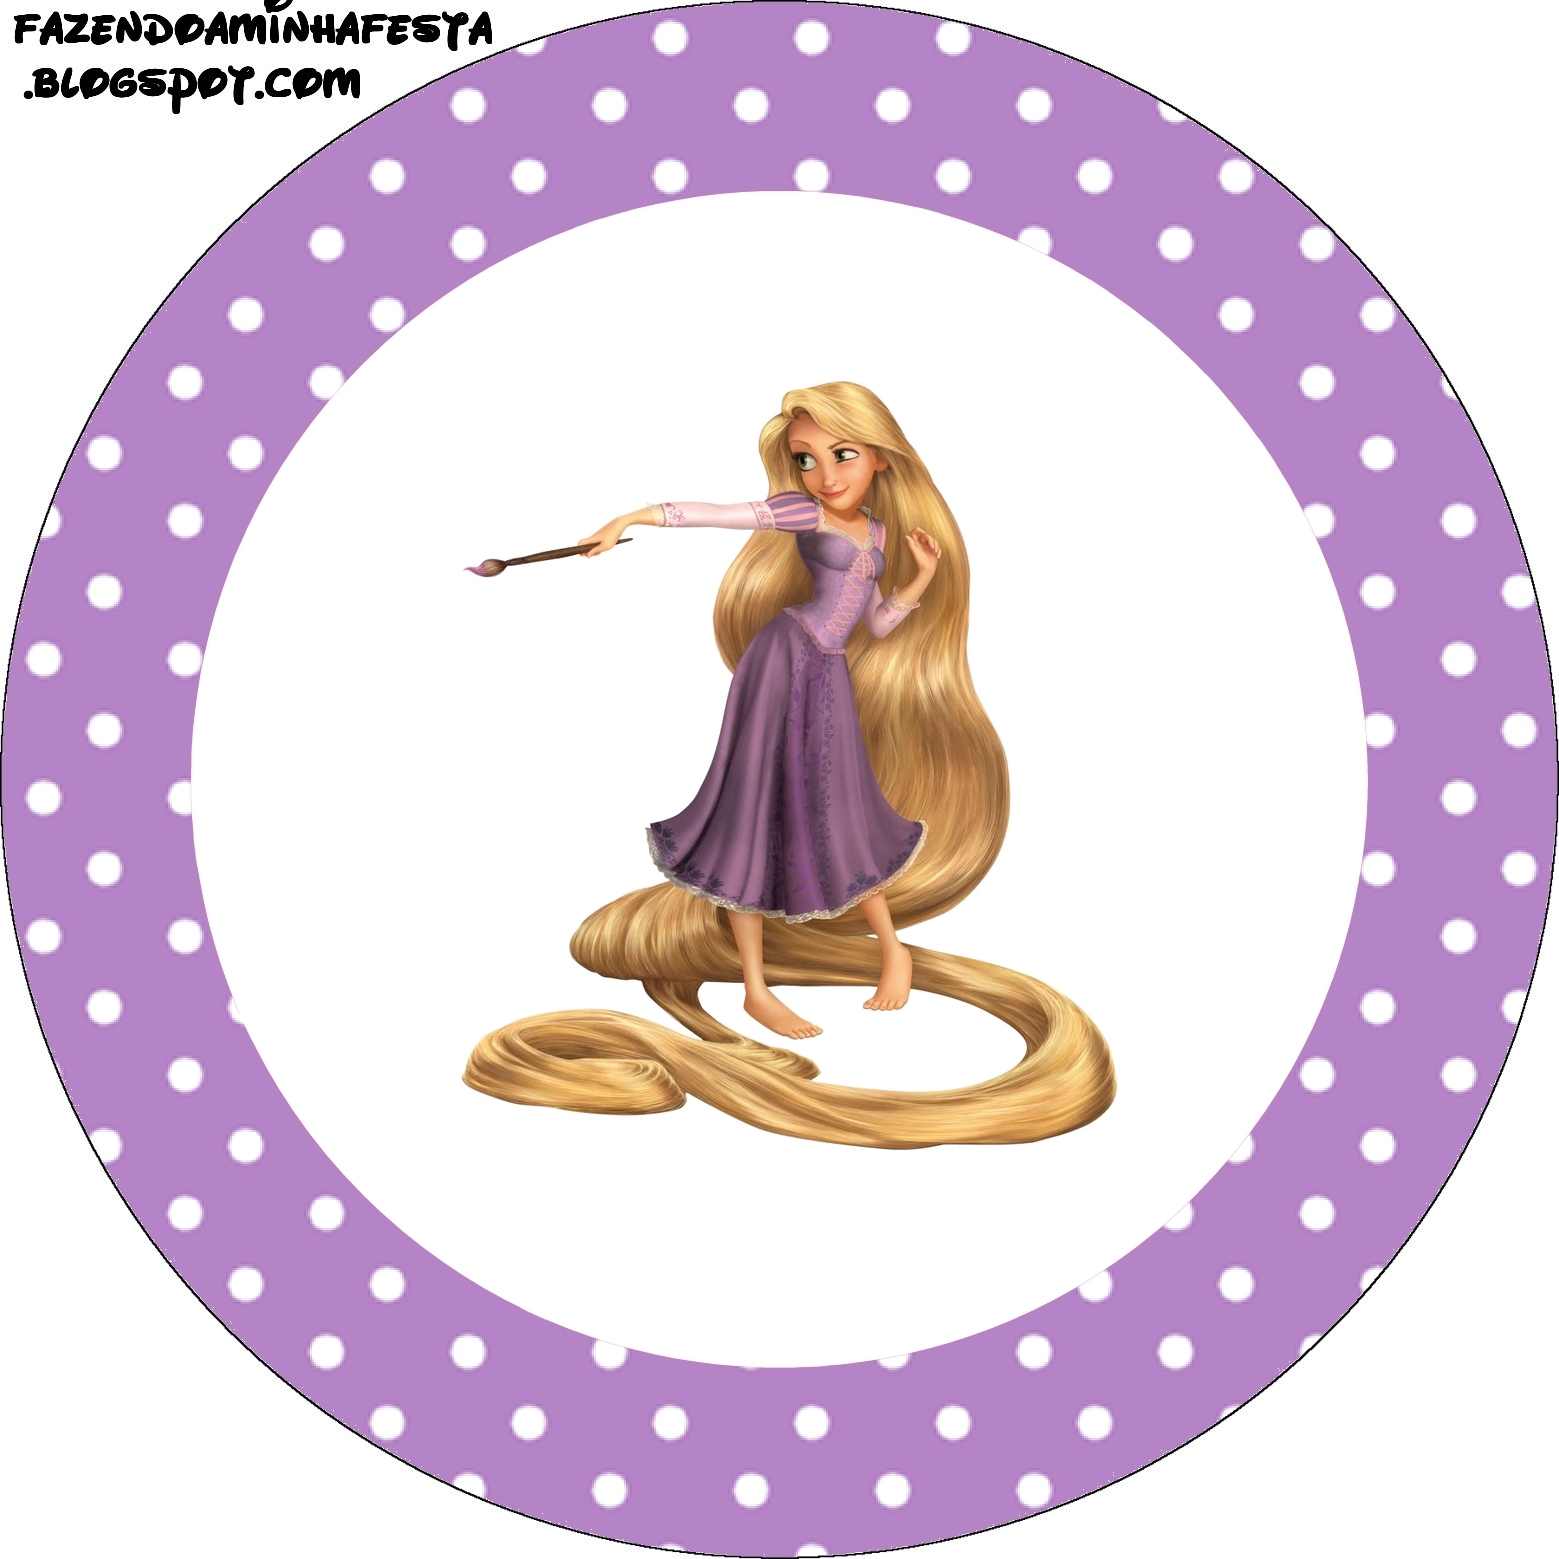 Tangled (Rapunzel) Party Free Printables. | Oh My Fiesta! in english